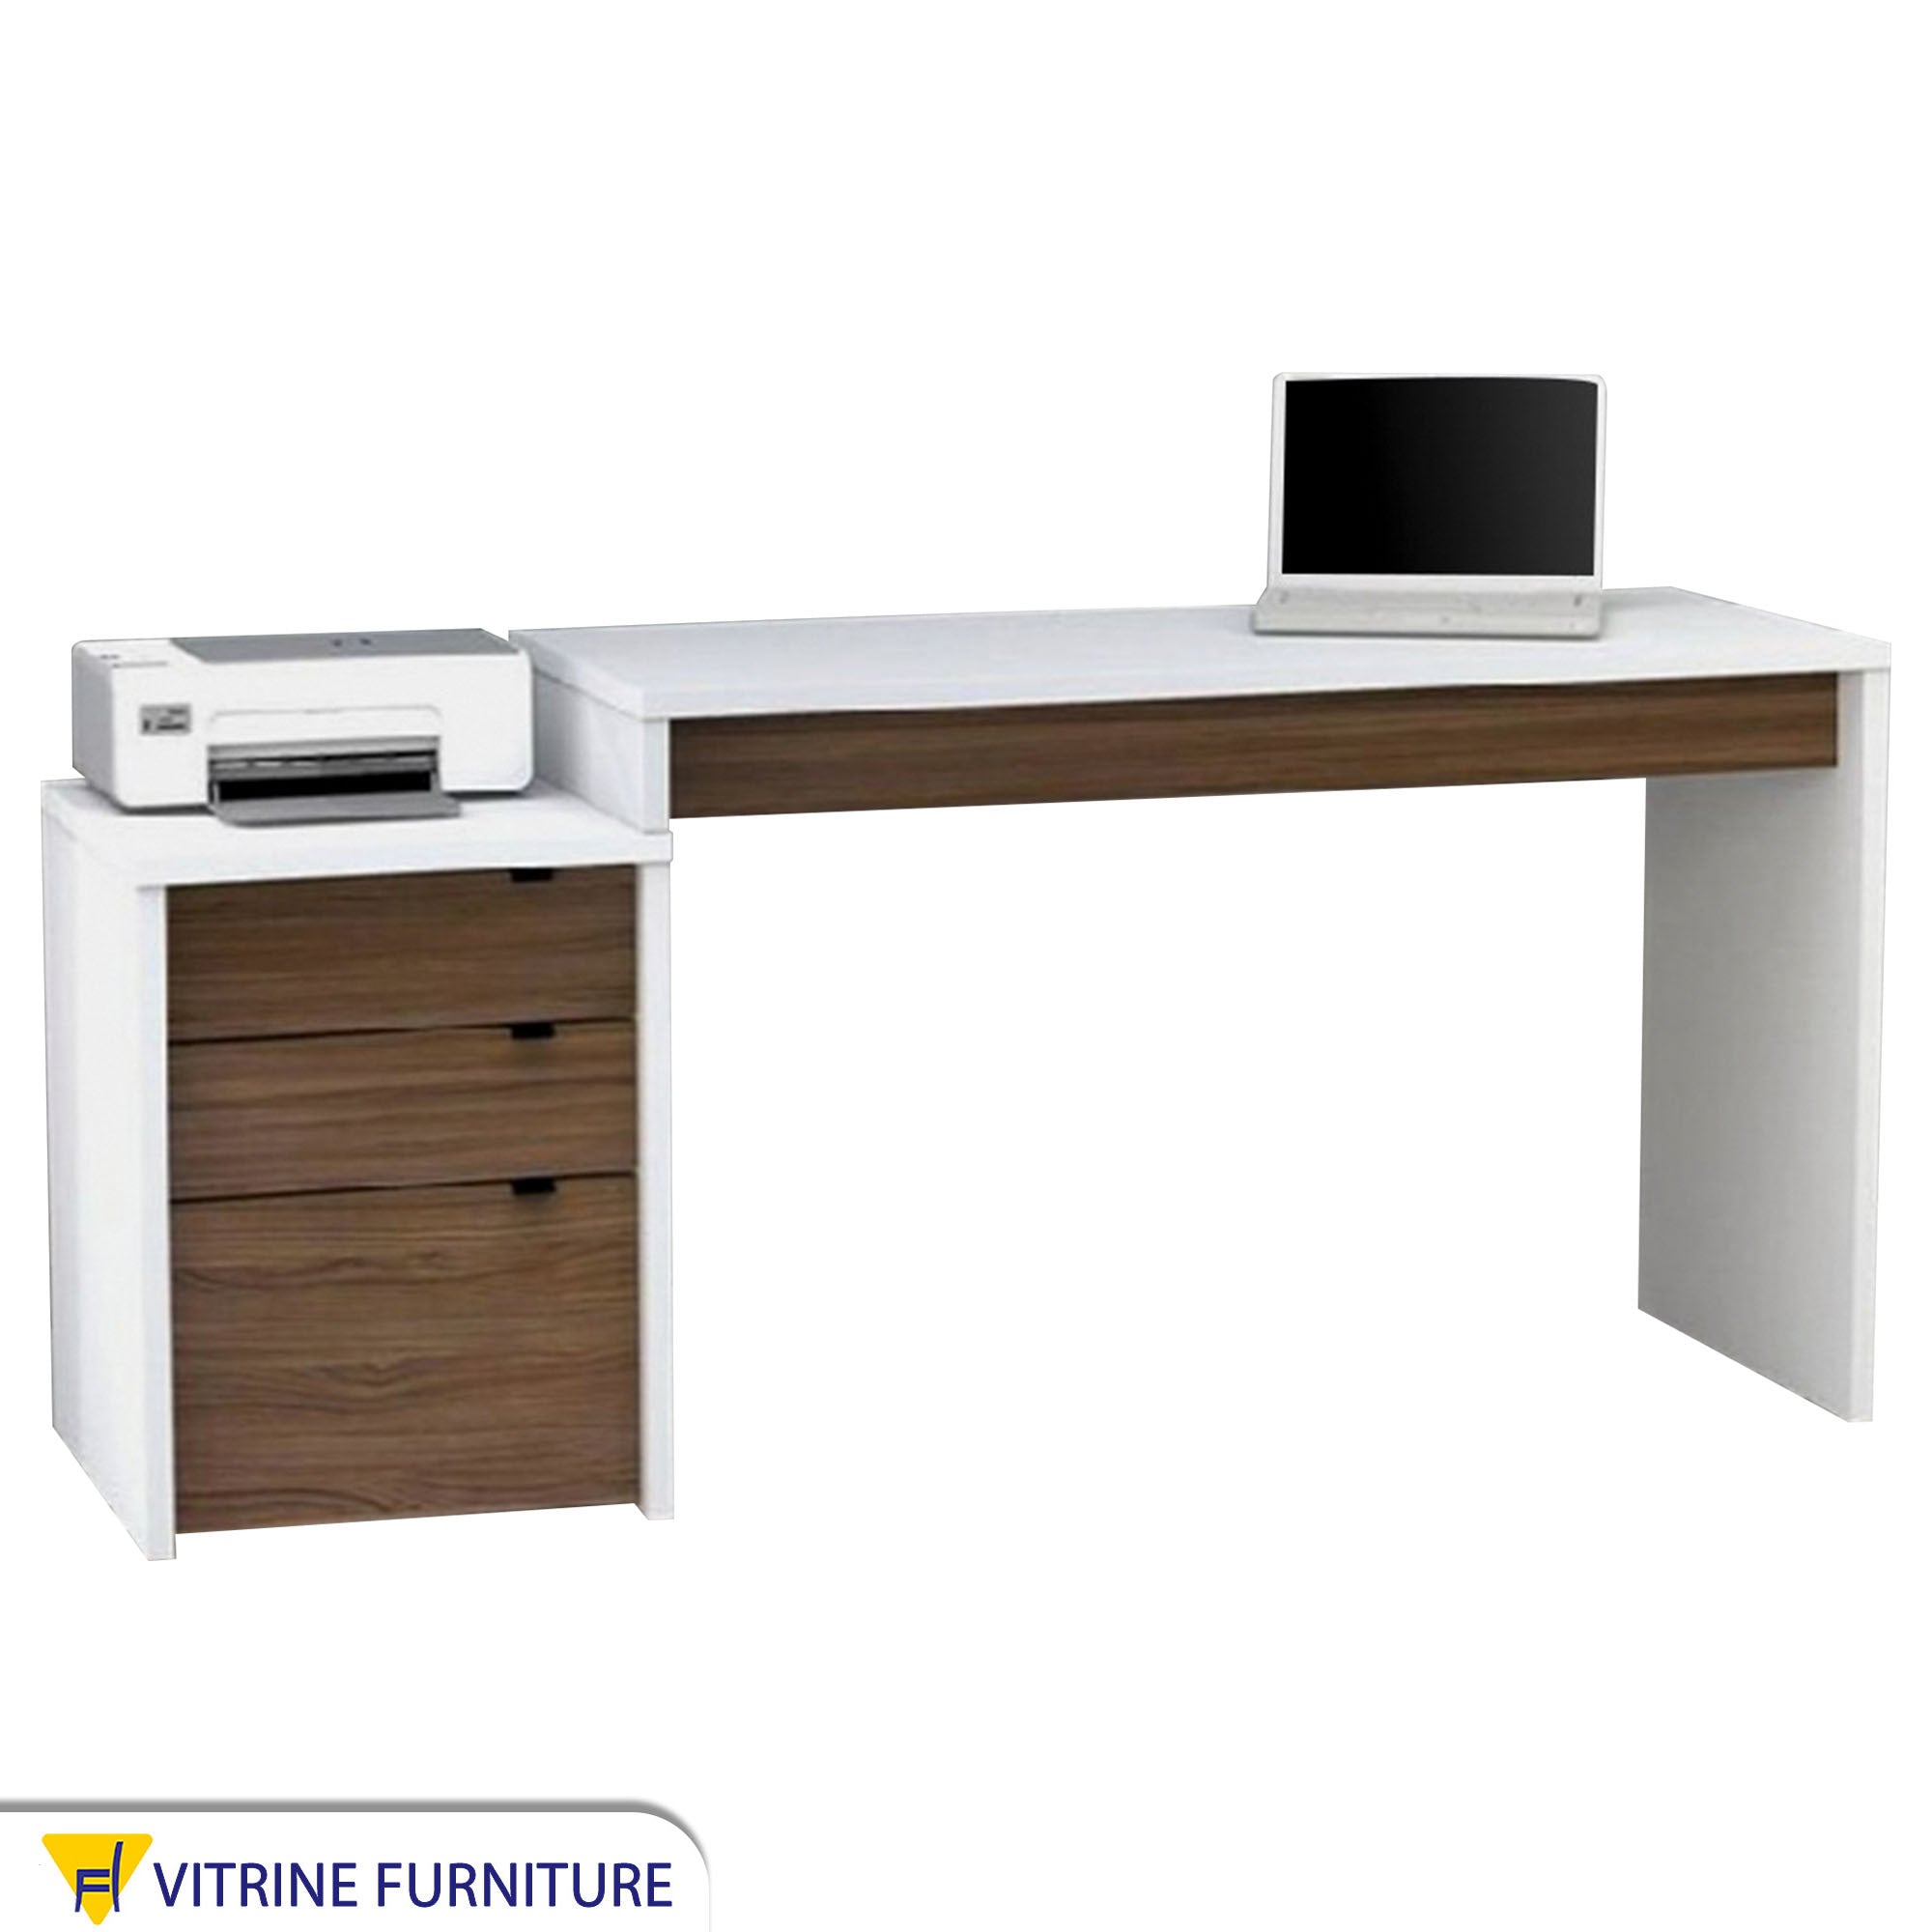 White and brown wooden desk